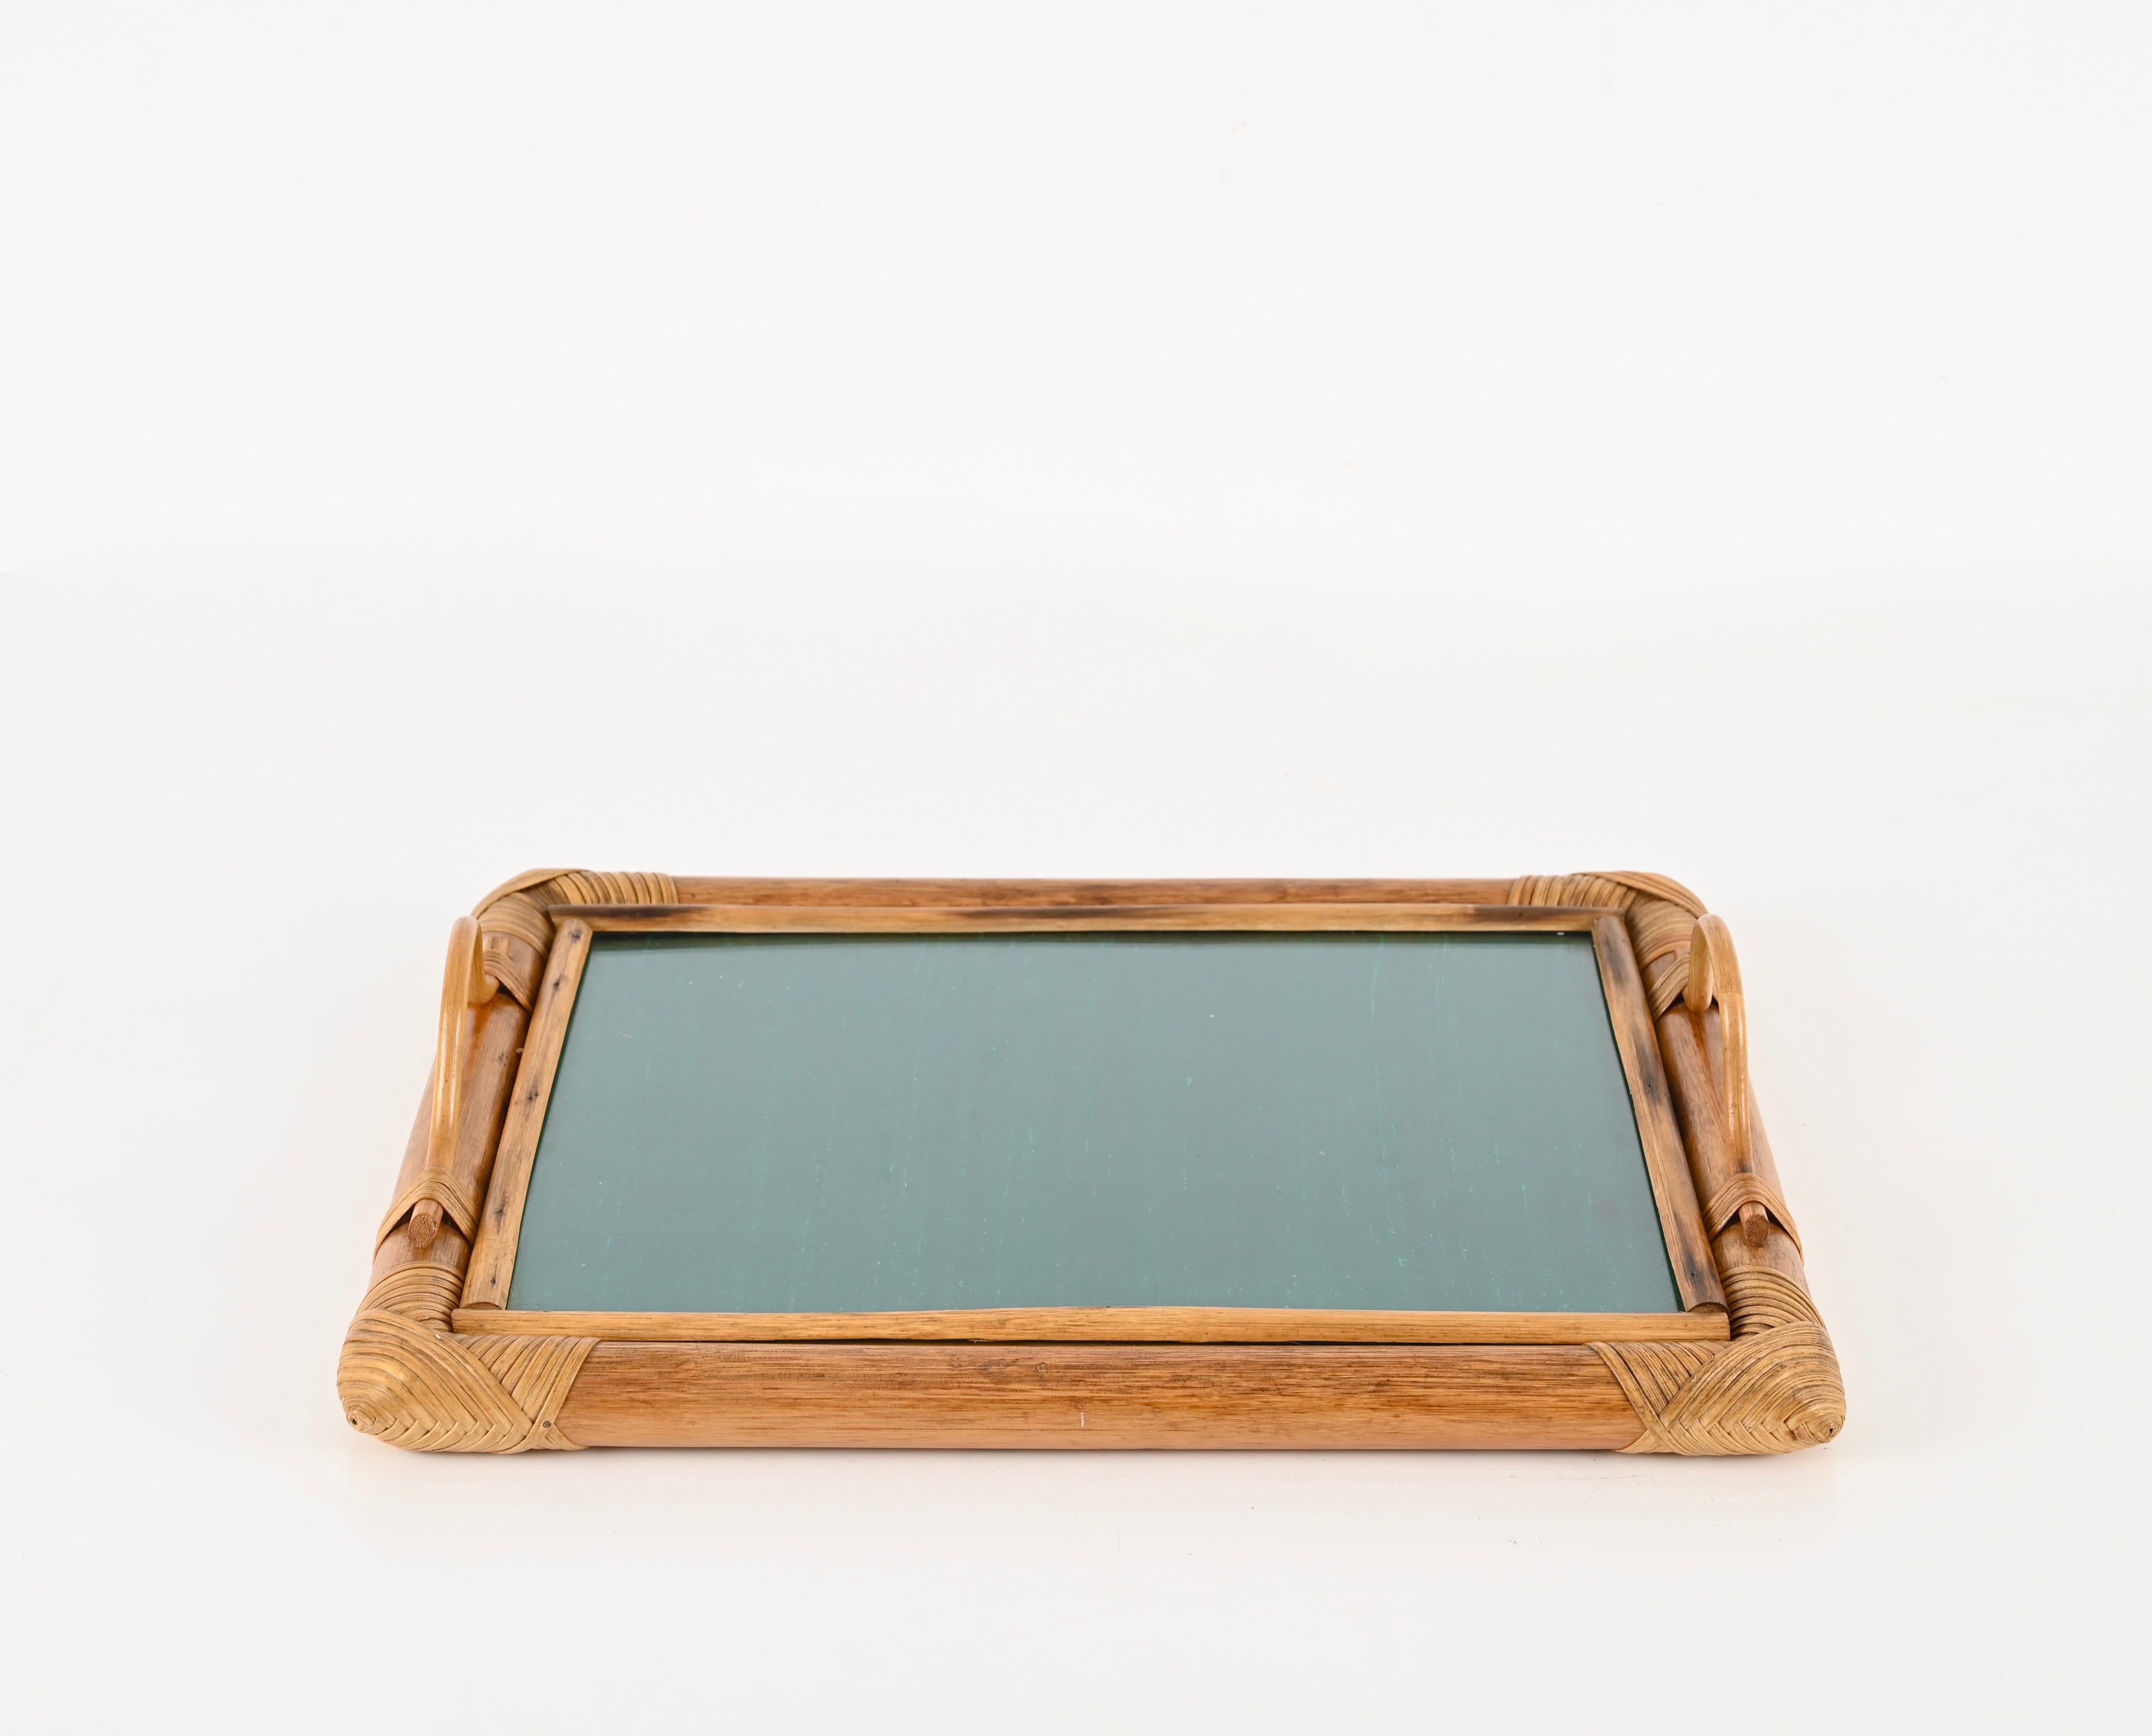 Hand-Crafted French Riviera Serving Tray in Bamboo and Rattan W/ Green Interior, Italy 1970s For Sale